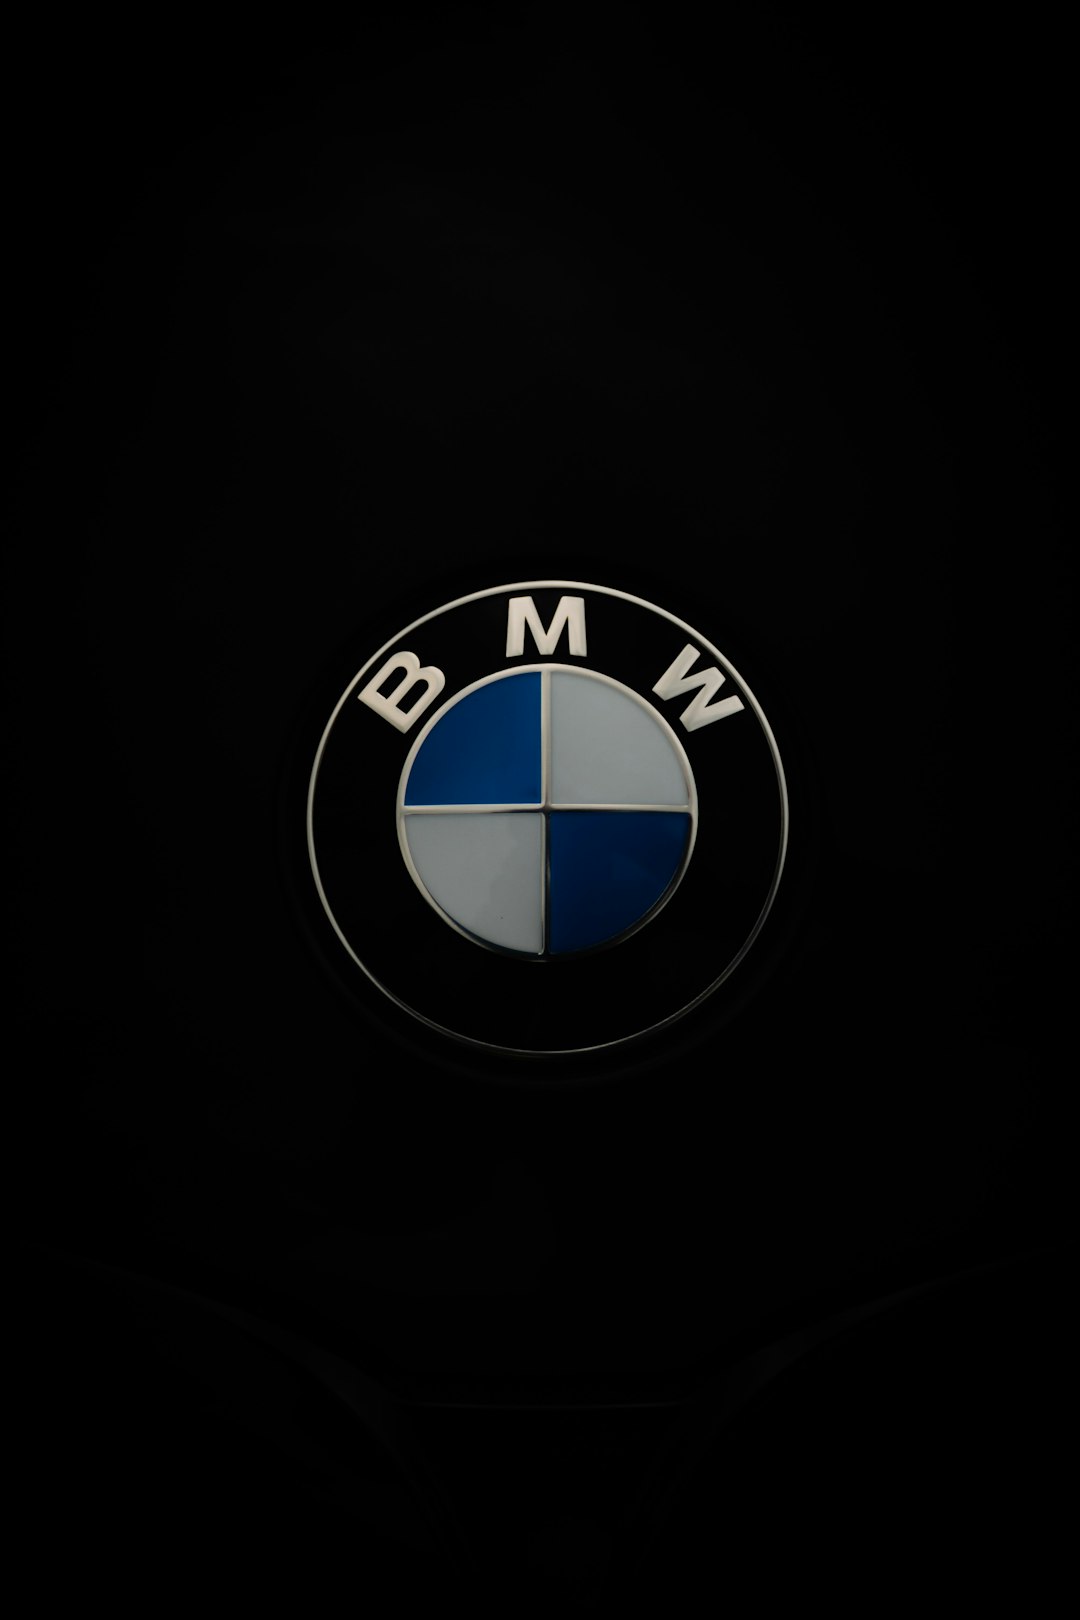 The BMW X3 M is a high-performance luxury SUV known for its powerful engine and sporty design.